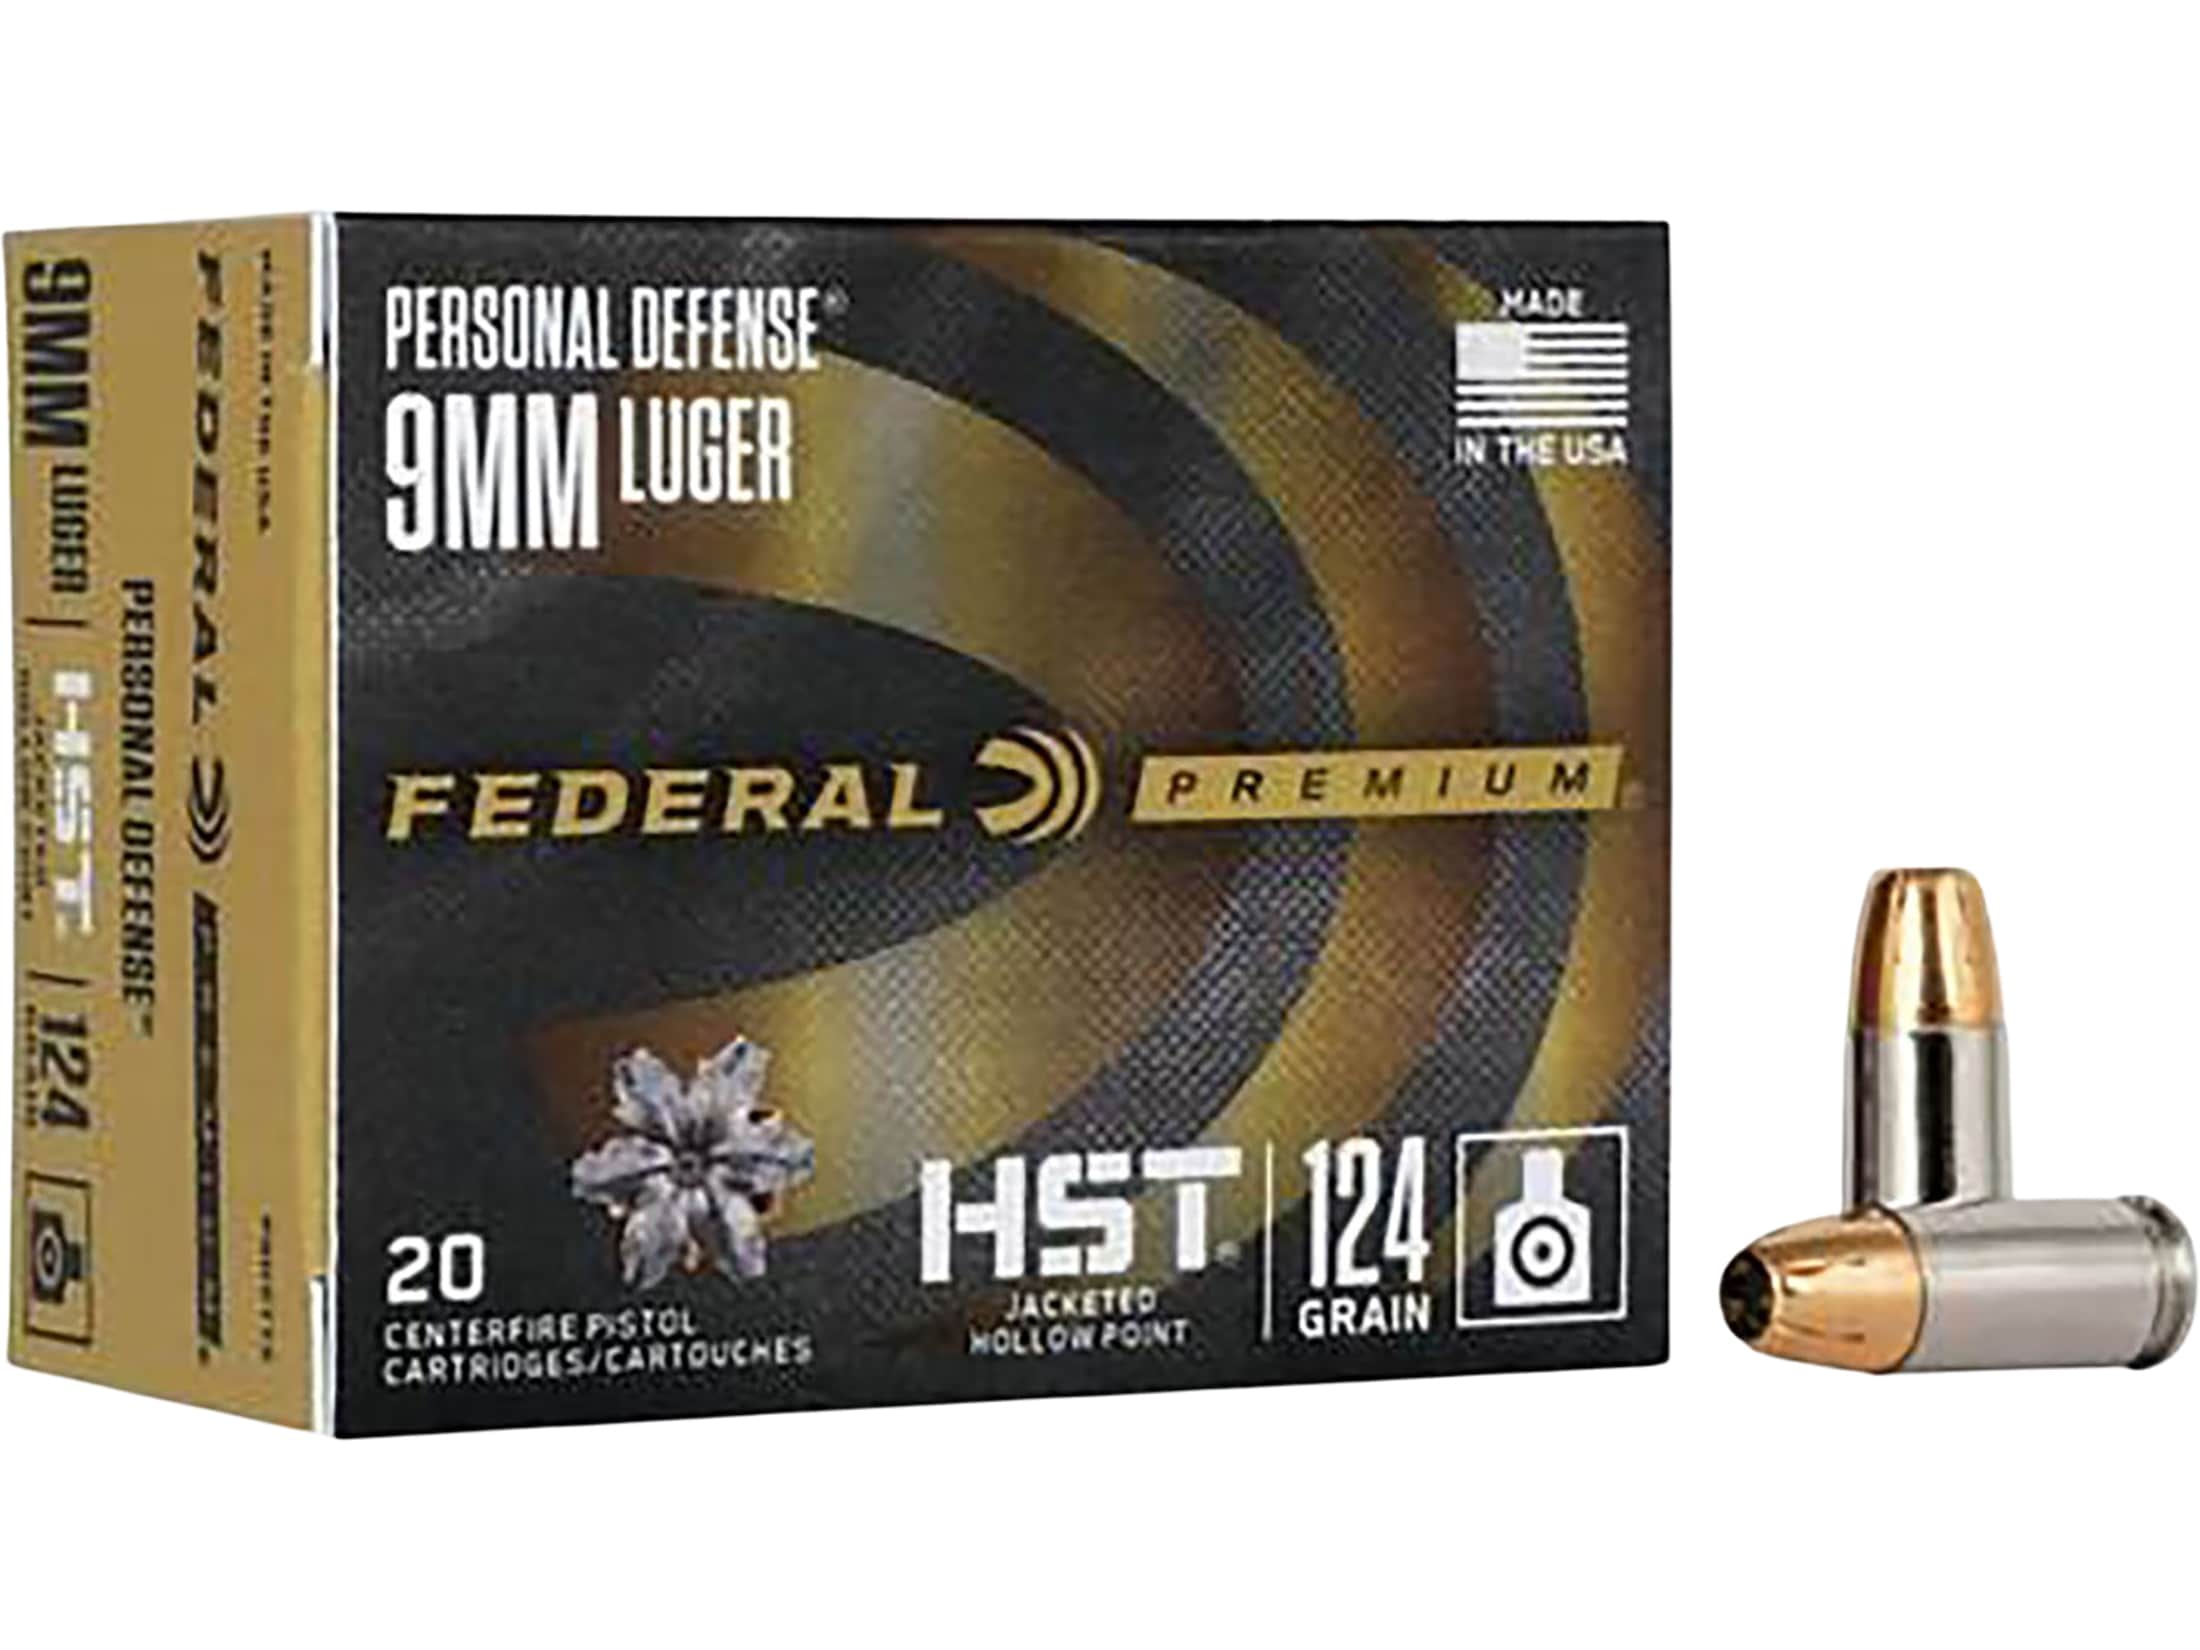 Federal Premium Personal Defense Ammunition 9mm Luger 124 Grain HST Jacketed Hollow Point